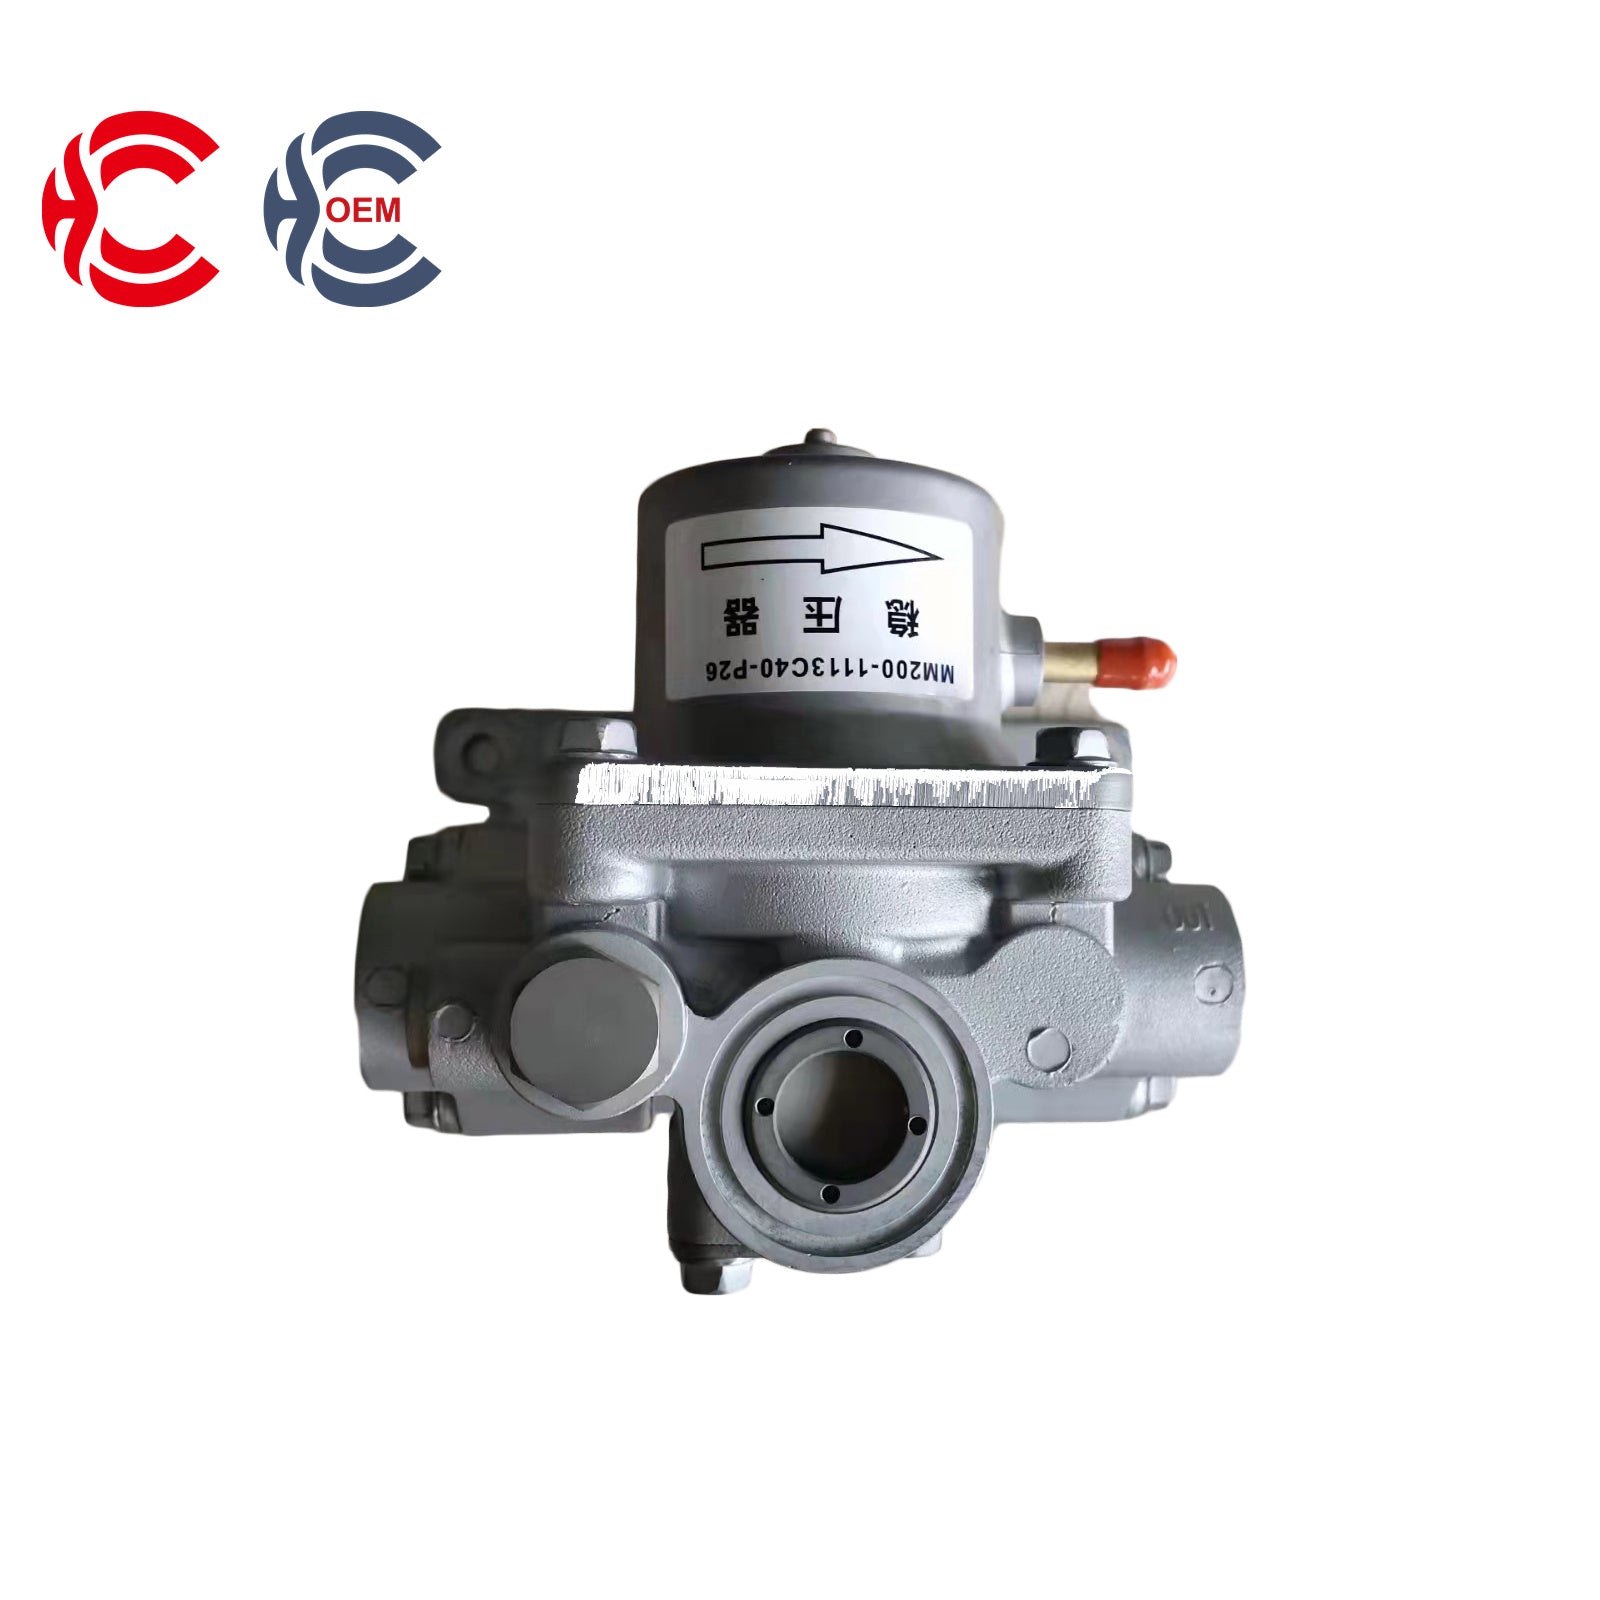 OEM: MM200-1113C40-P26Material: ABS MetalColor: black silver goldenOrigin: Made in ChinaWeight: 2000gPacking List: 1* Gas Pressurizer More ServiceWe can provide OEM Manufacturing serviceWe can Be your one-step solution for Auto PartsWe can provide technical scheme for you Feel Free to Contact Us, We will get back to you as soon as possible.